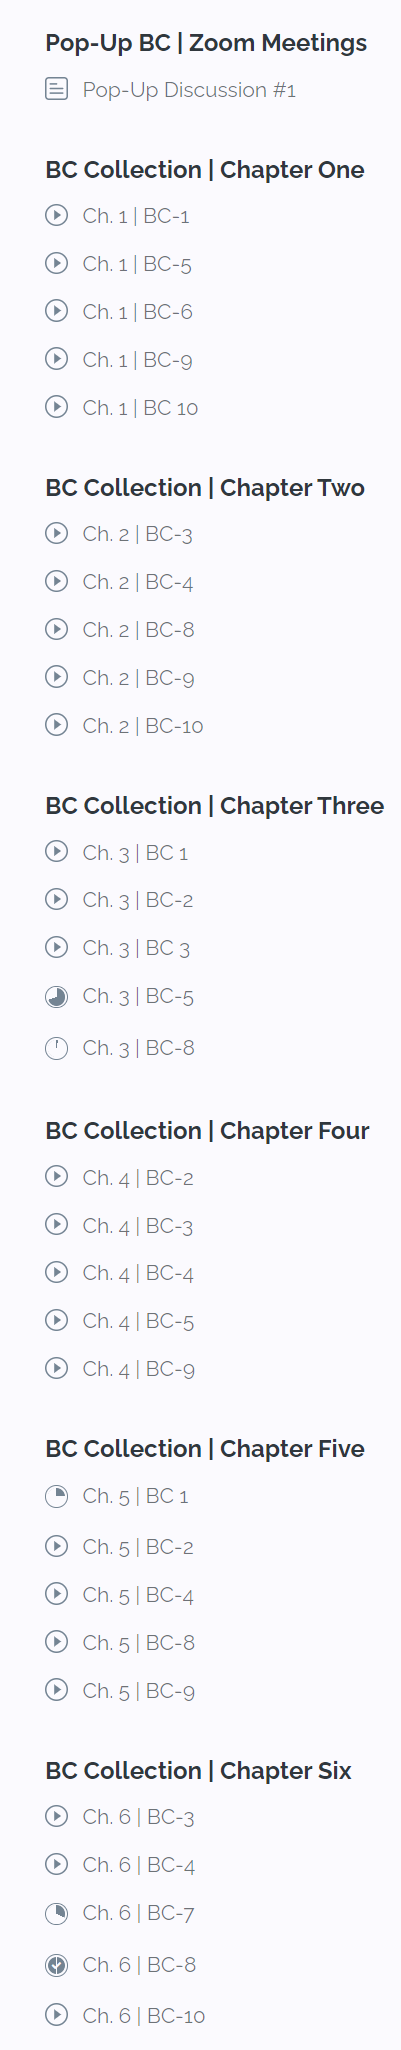 List of content in the book club collection